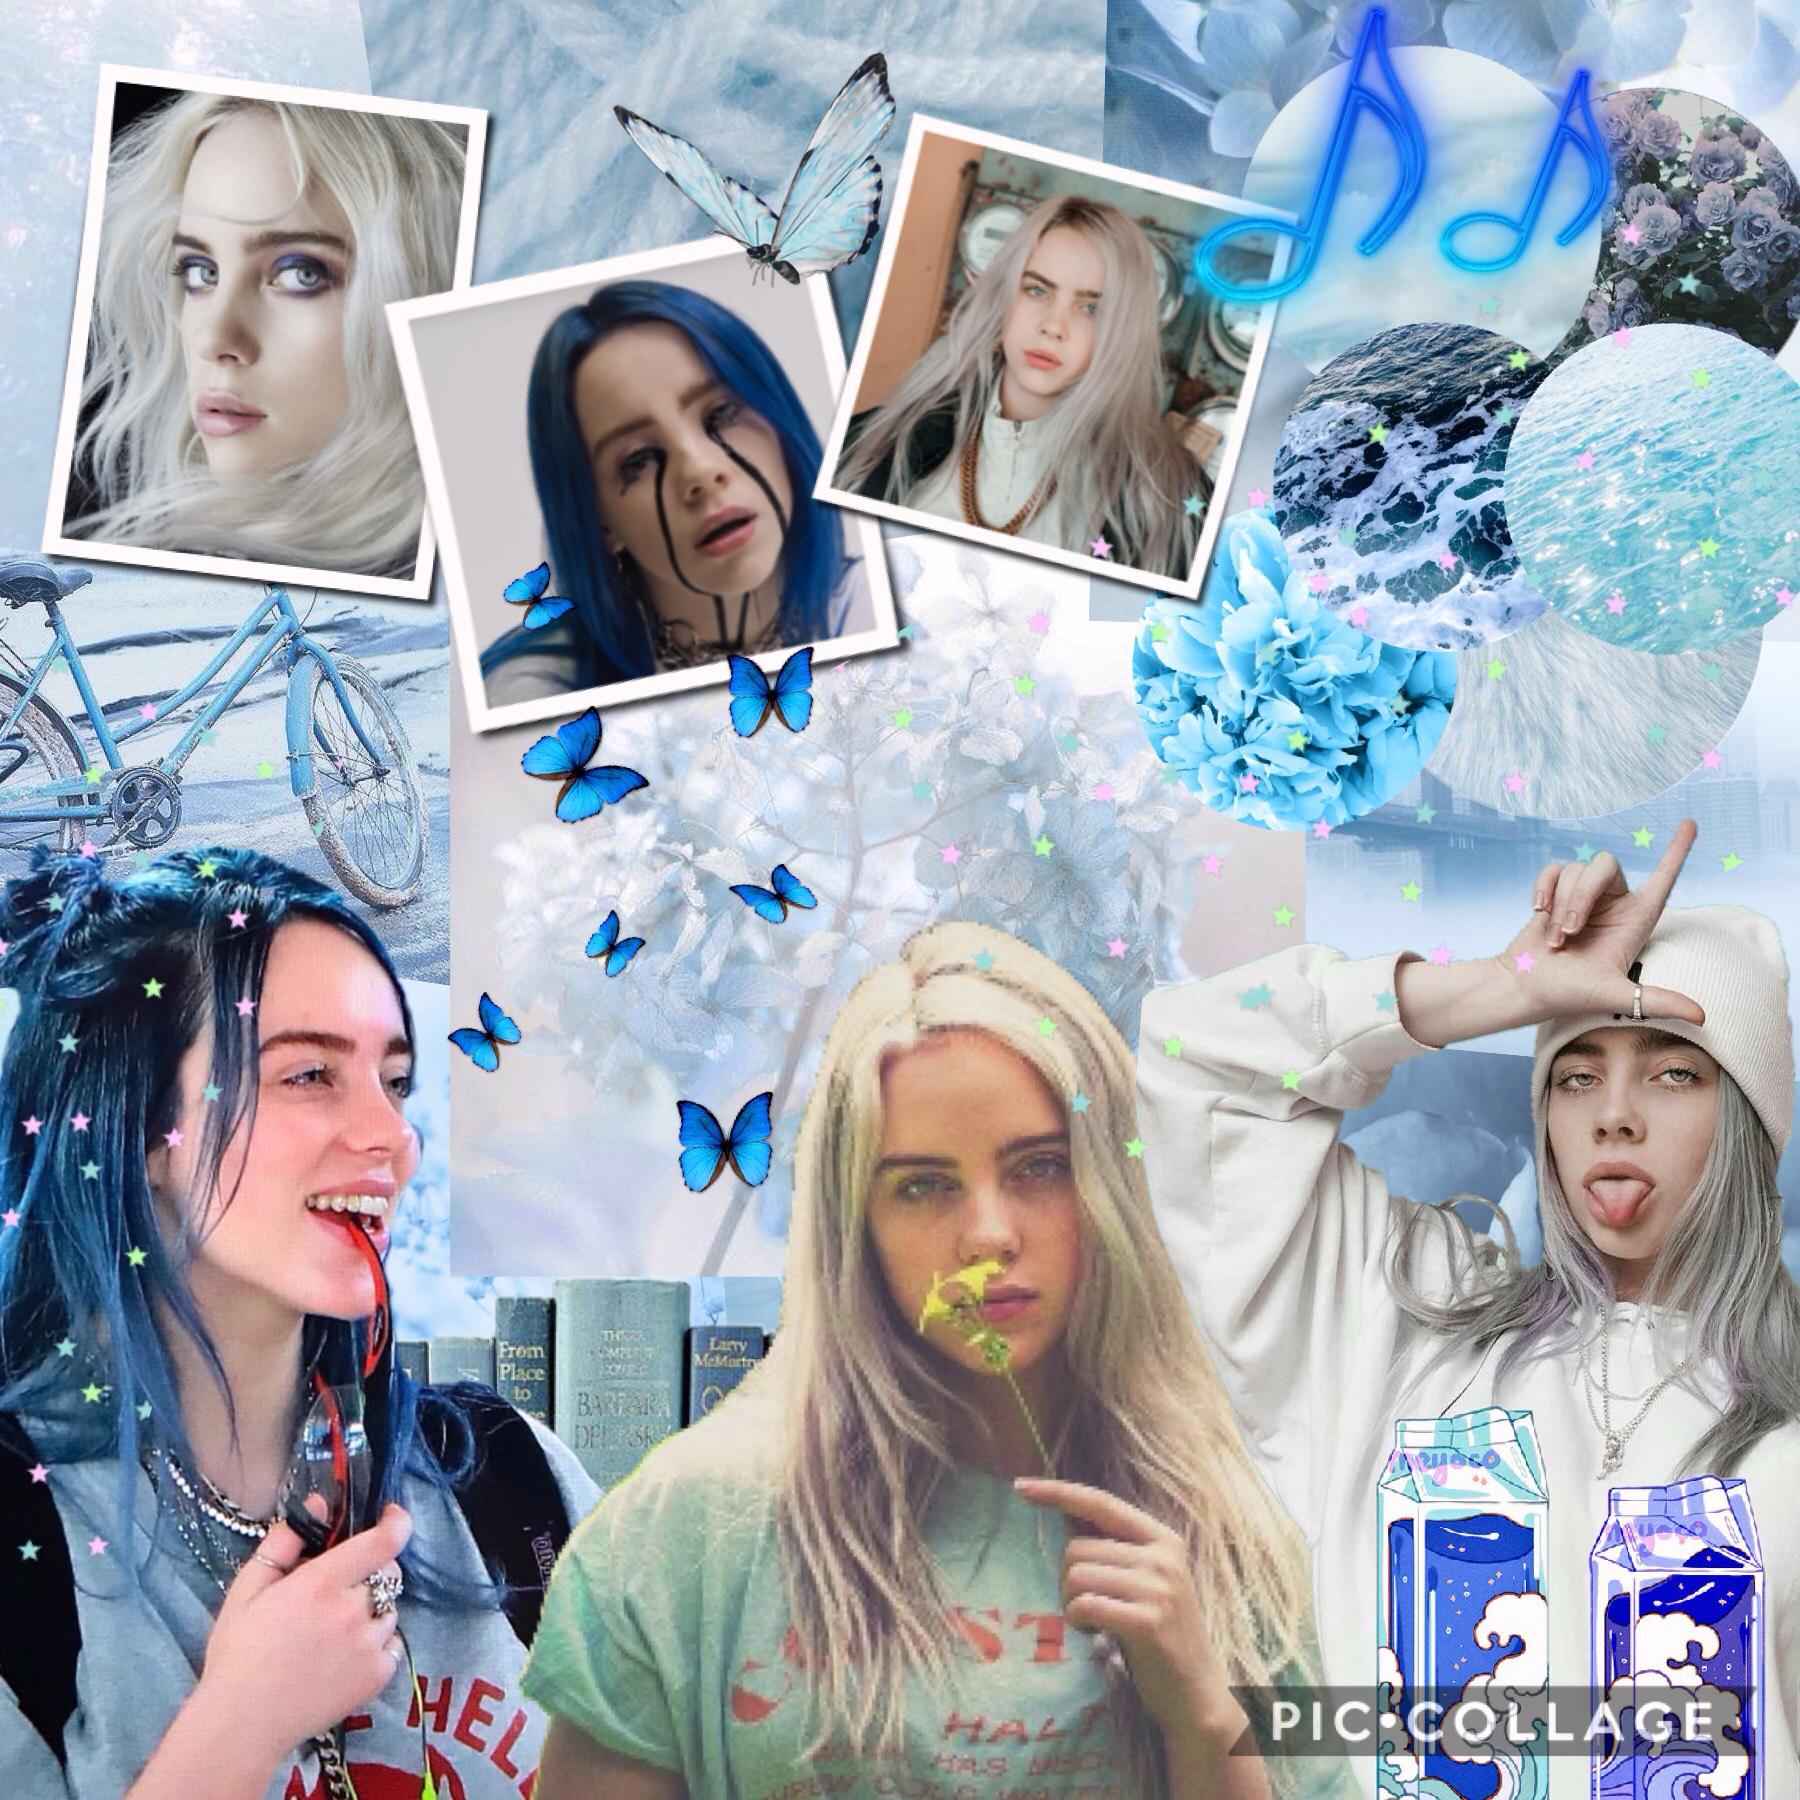 🌊 •tap!• 🌊
billie! she's so talented and amazing
qotd: what's your fave song by her?